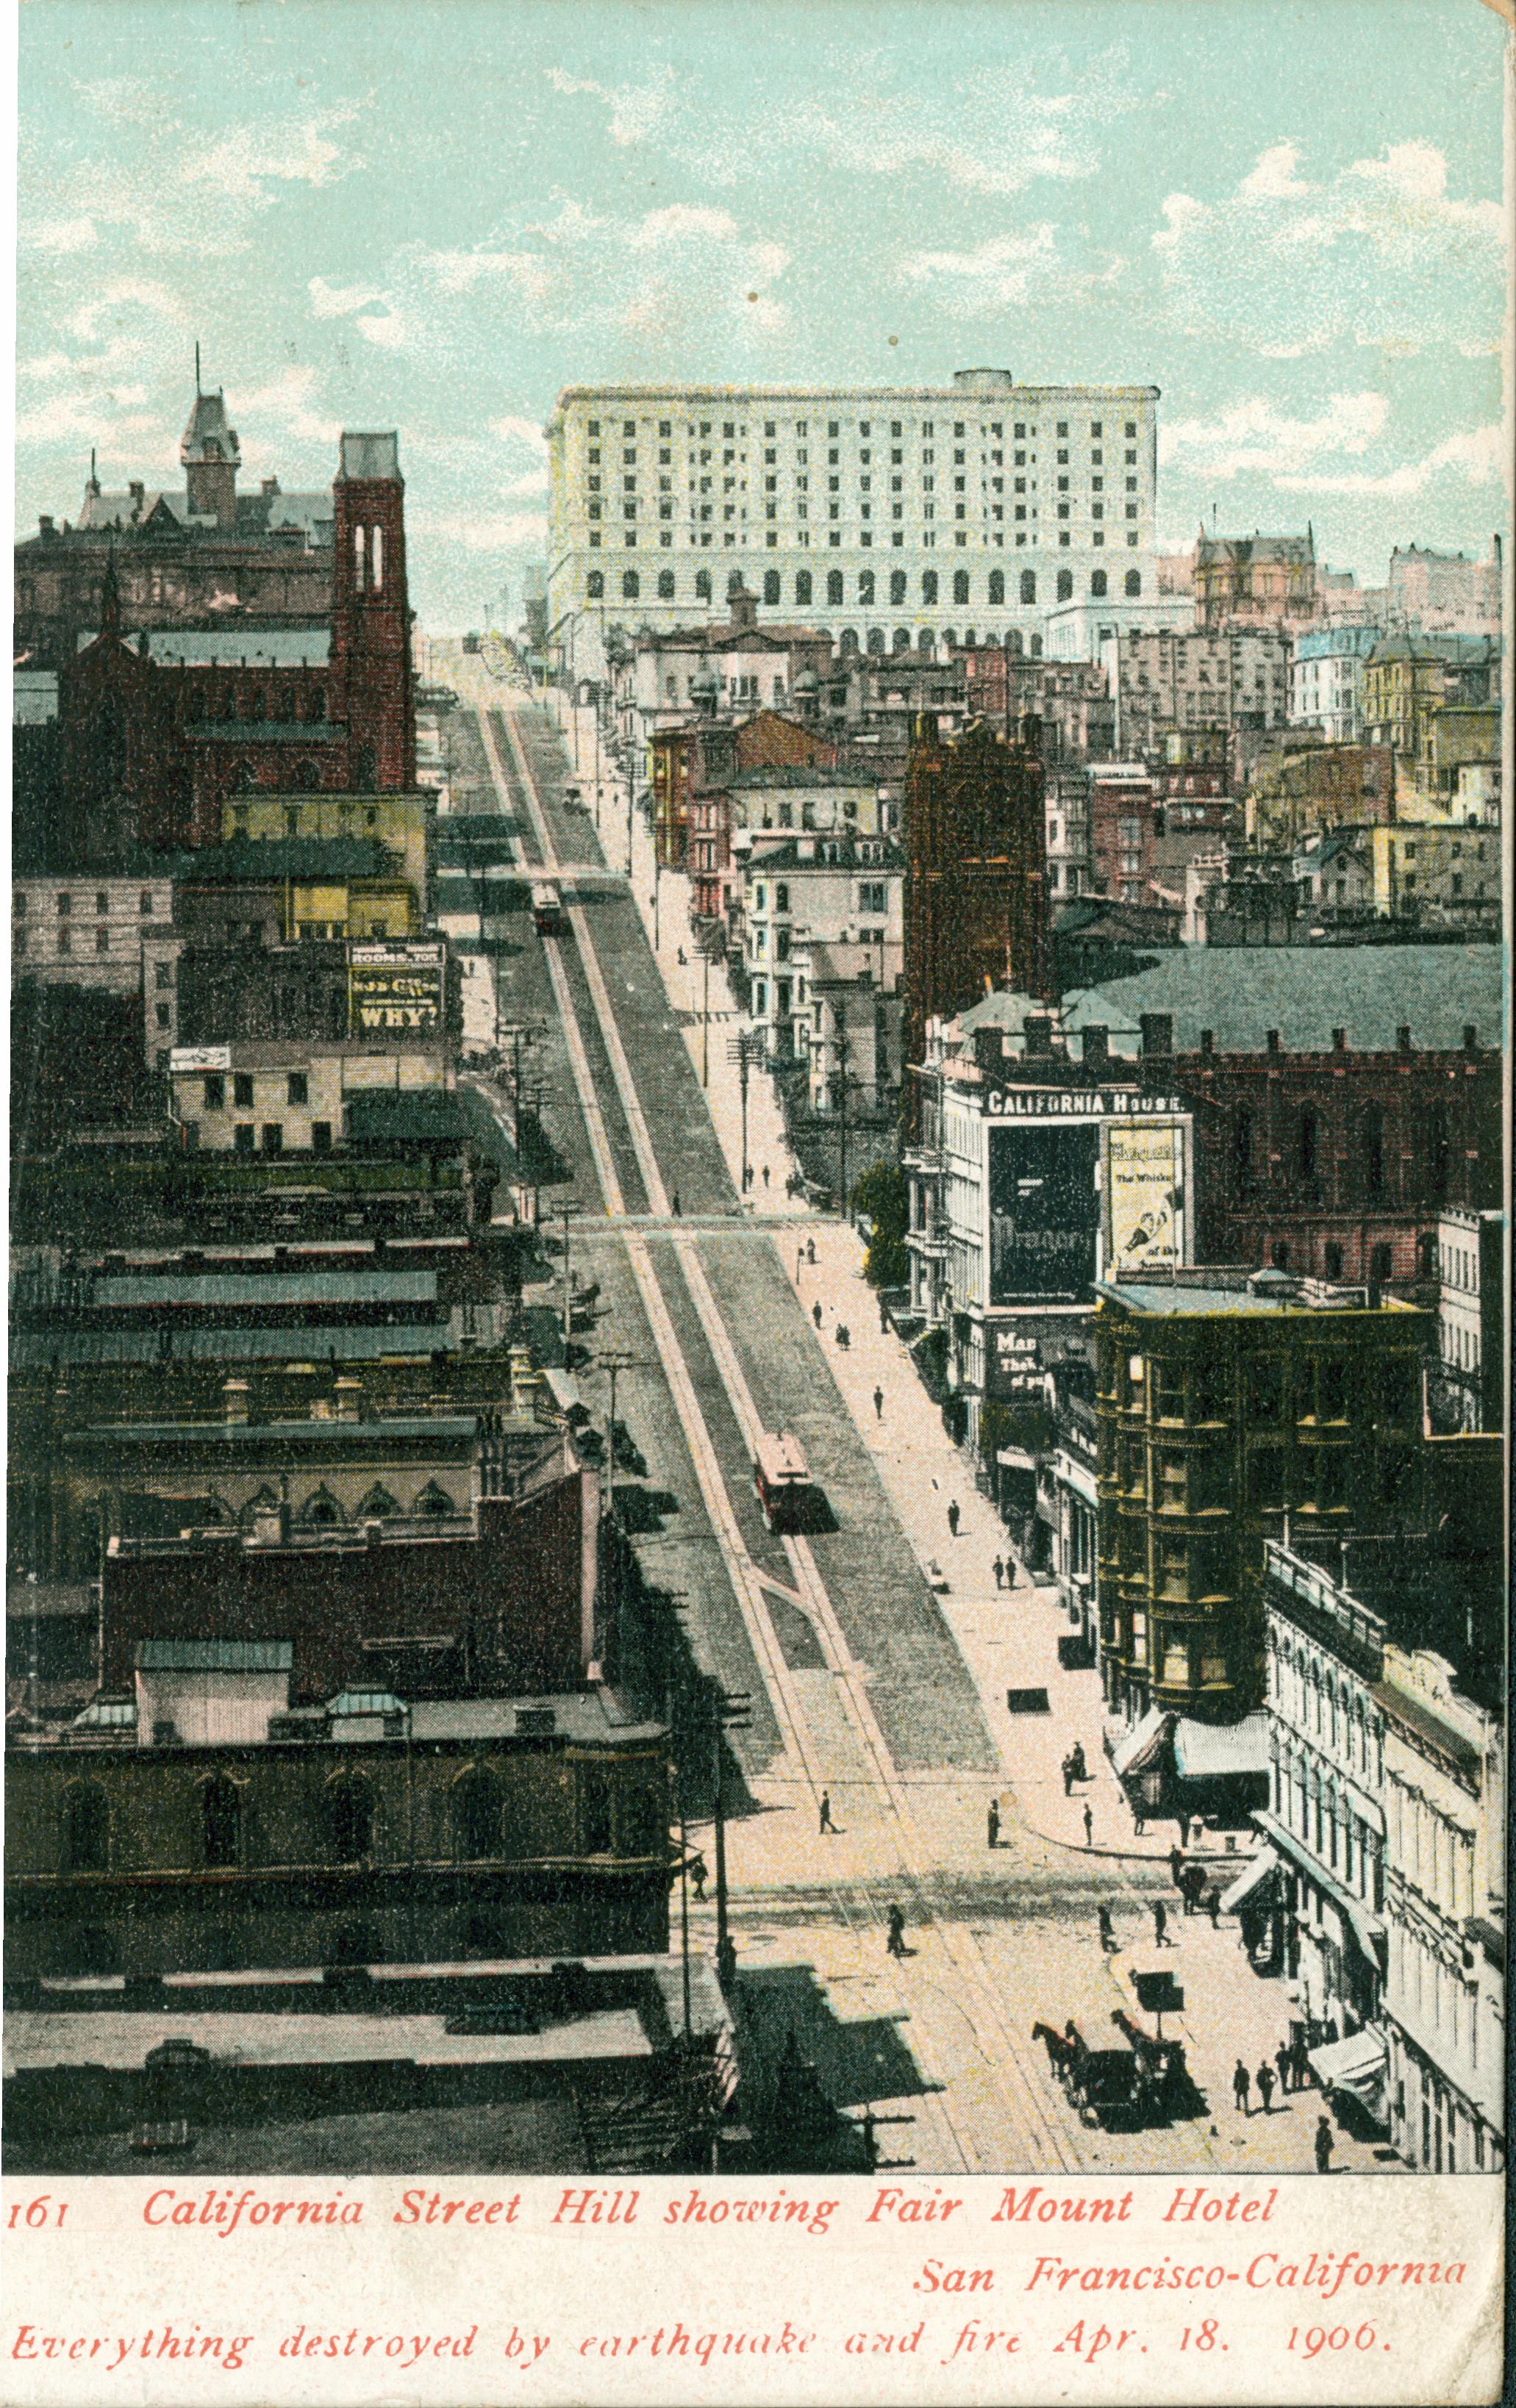 Shows California Street Hill and the Fairmont Hotel before the earthquake and fore of 1906.